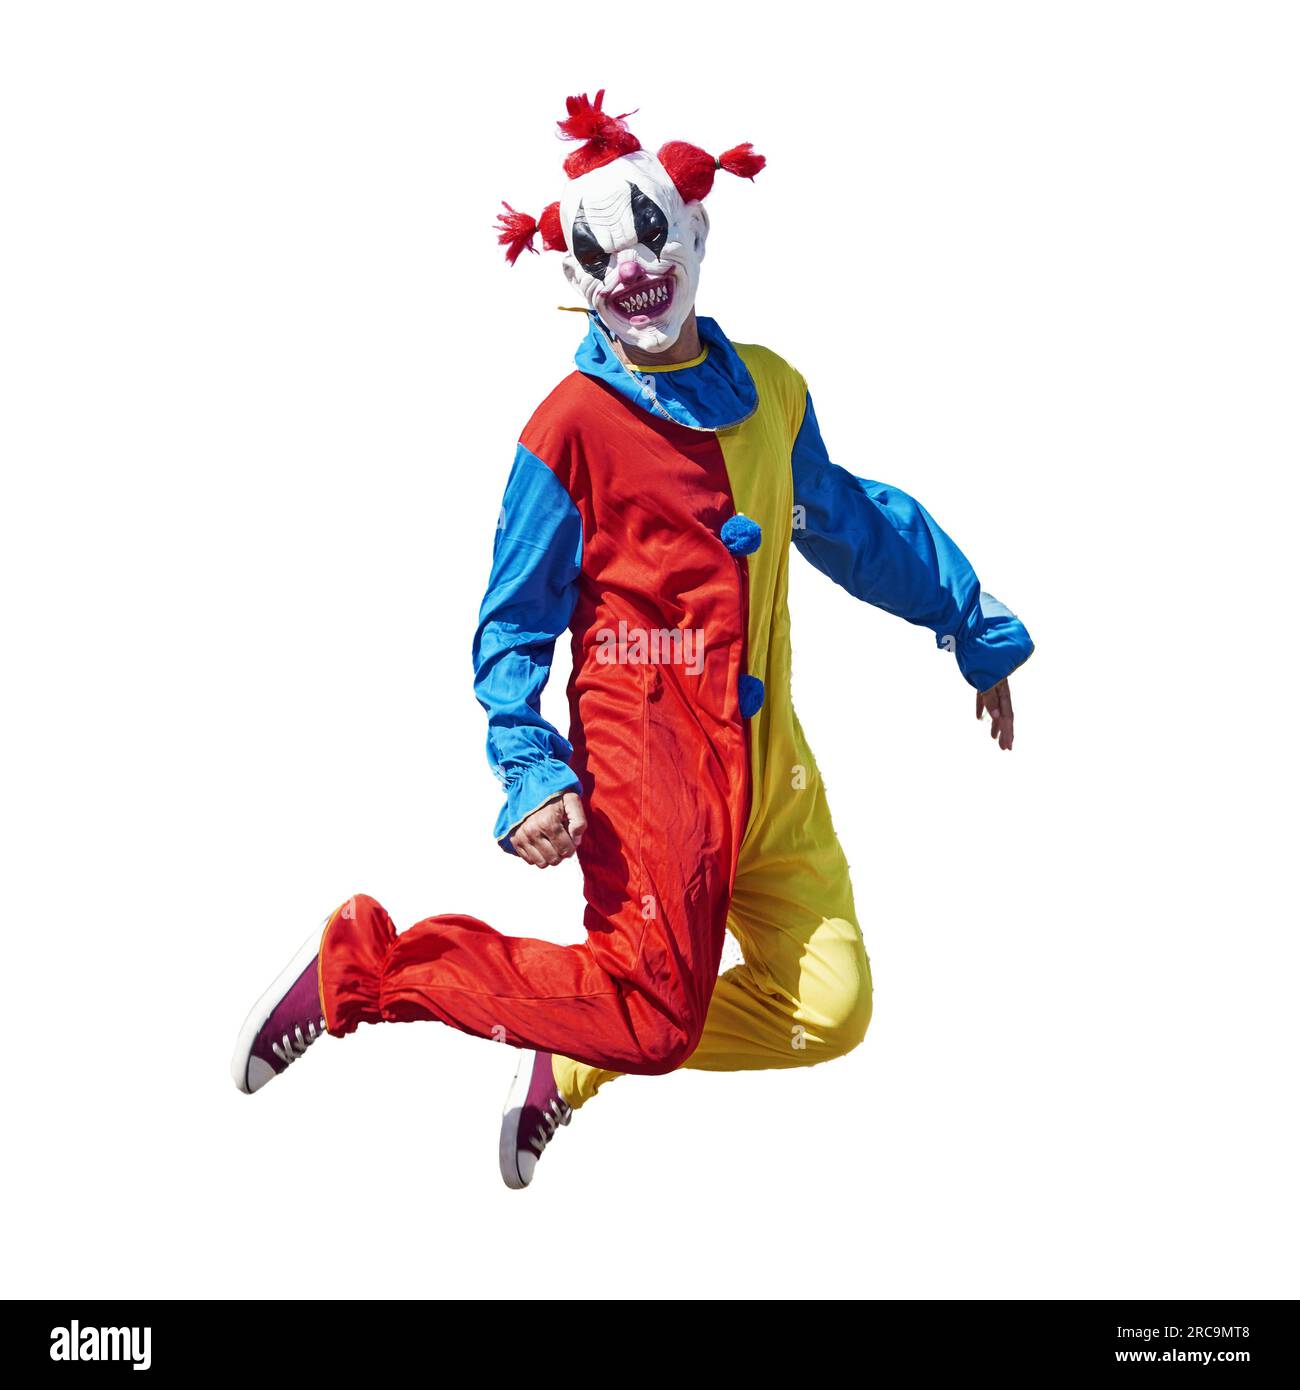 a scary clown wearing a colorful yellow, red and blue costume, jumping on a white background Stock Photo